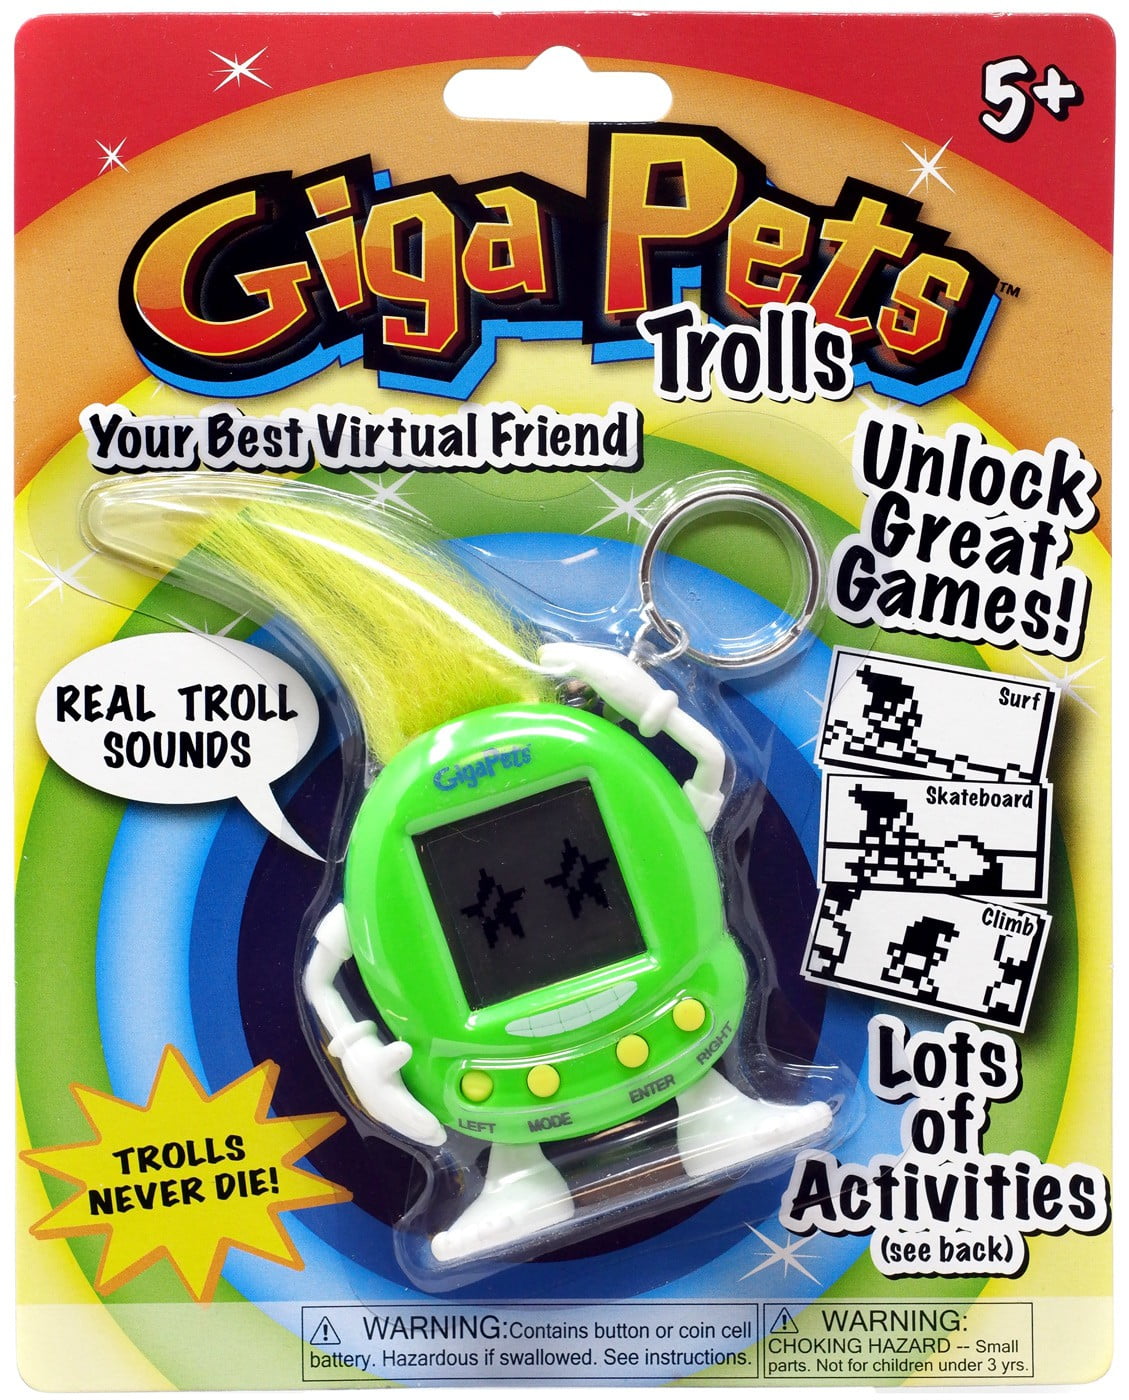 Giga Pets AR Puppy Dog Virtual Animal Pet Toy 2nd Edition in 3d for sale online 